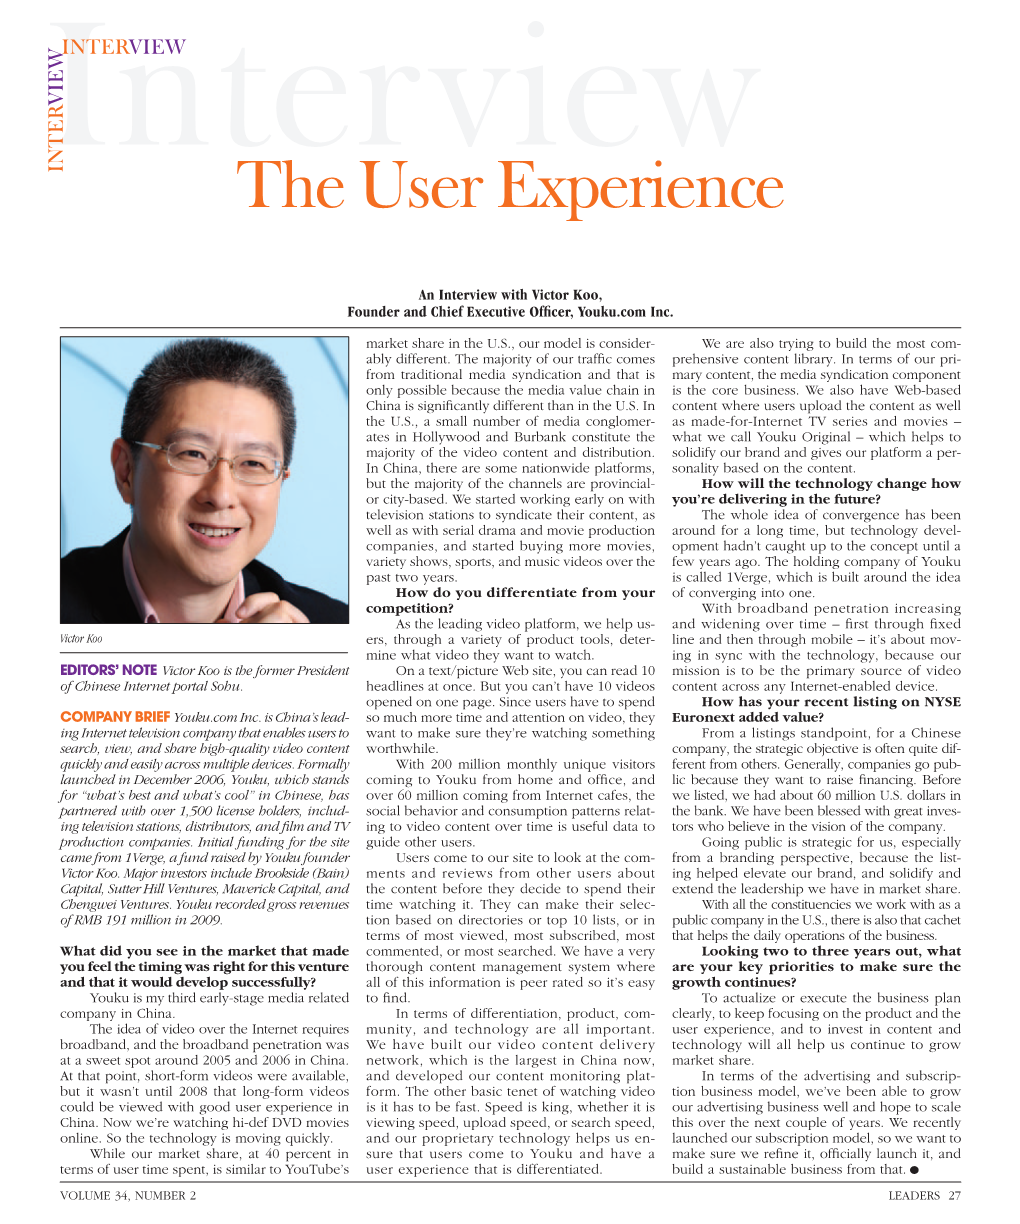 To Download a PDF of an Interview with Victor Koo, Founder and Chief Executive